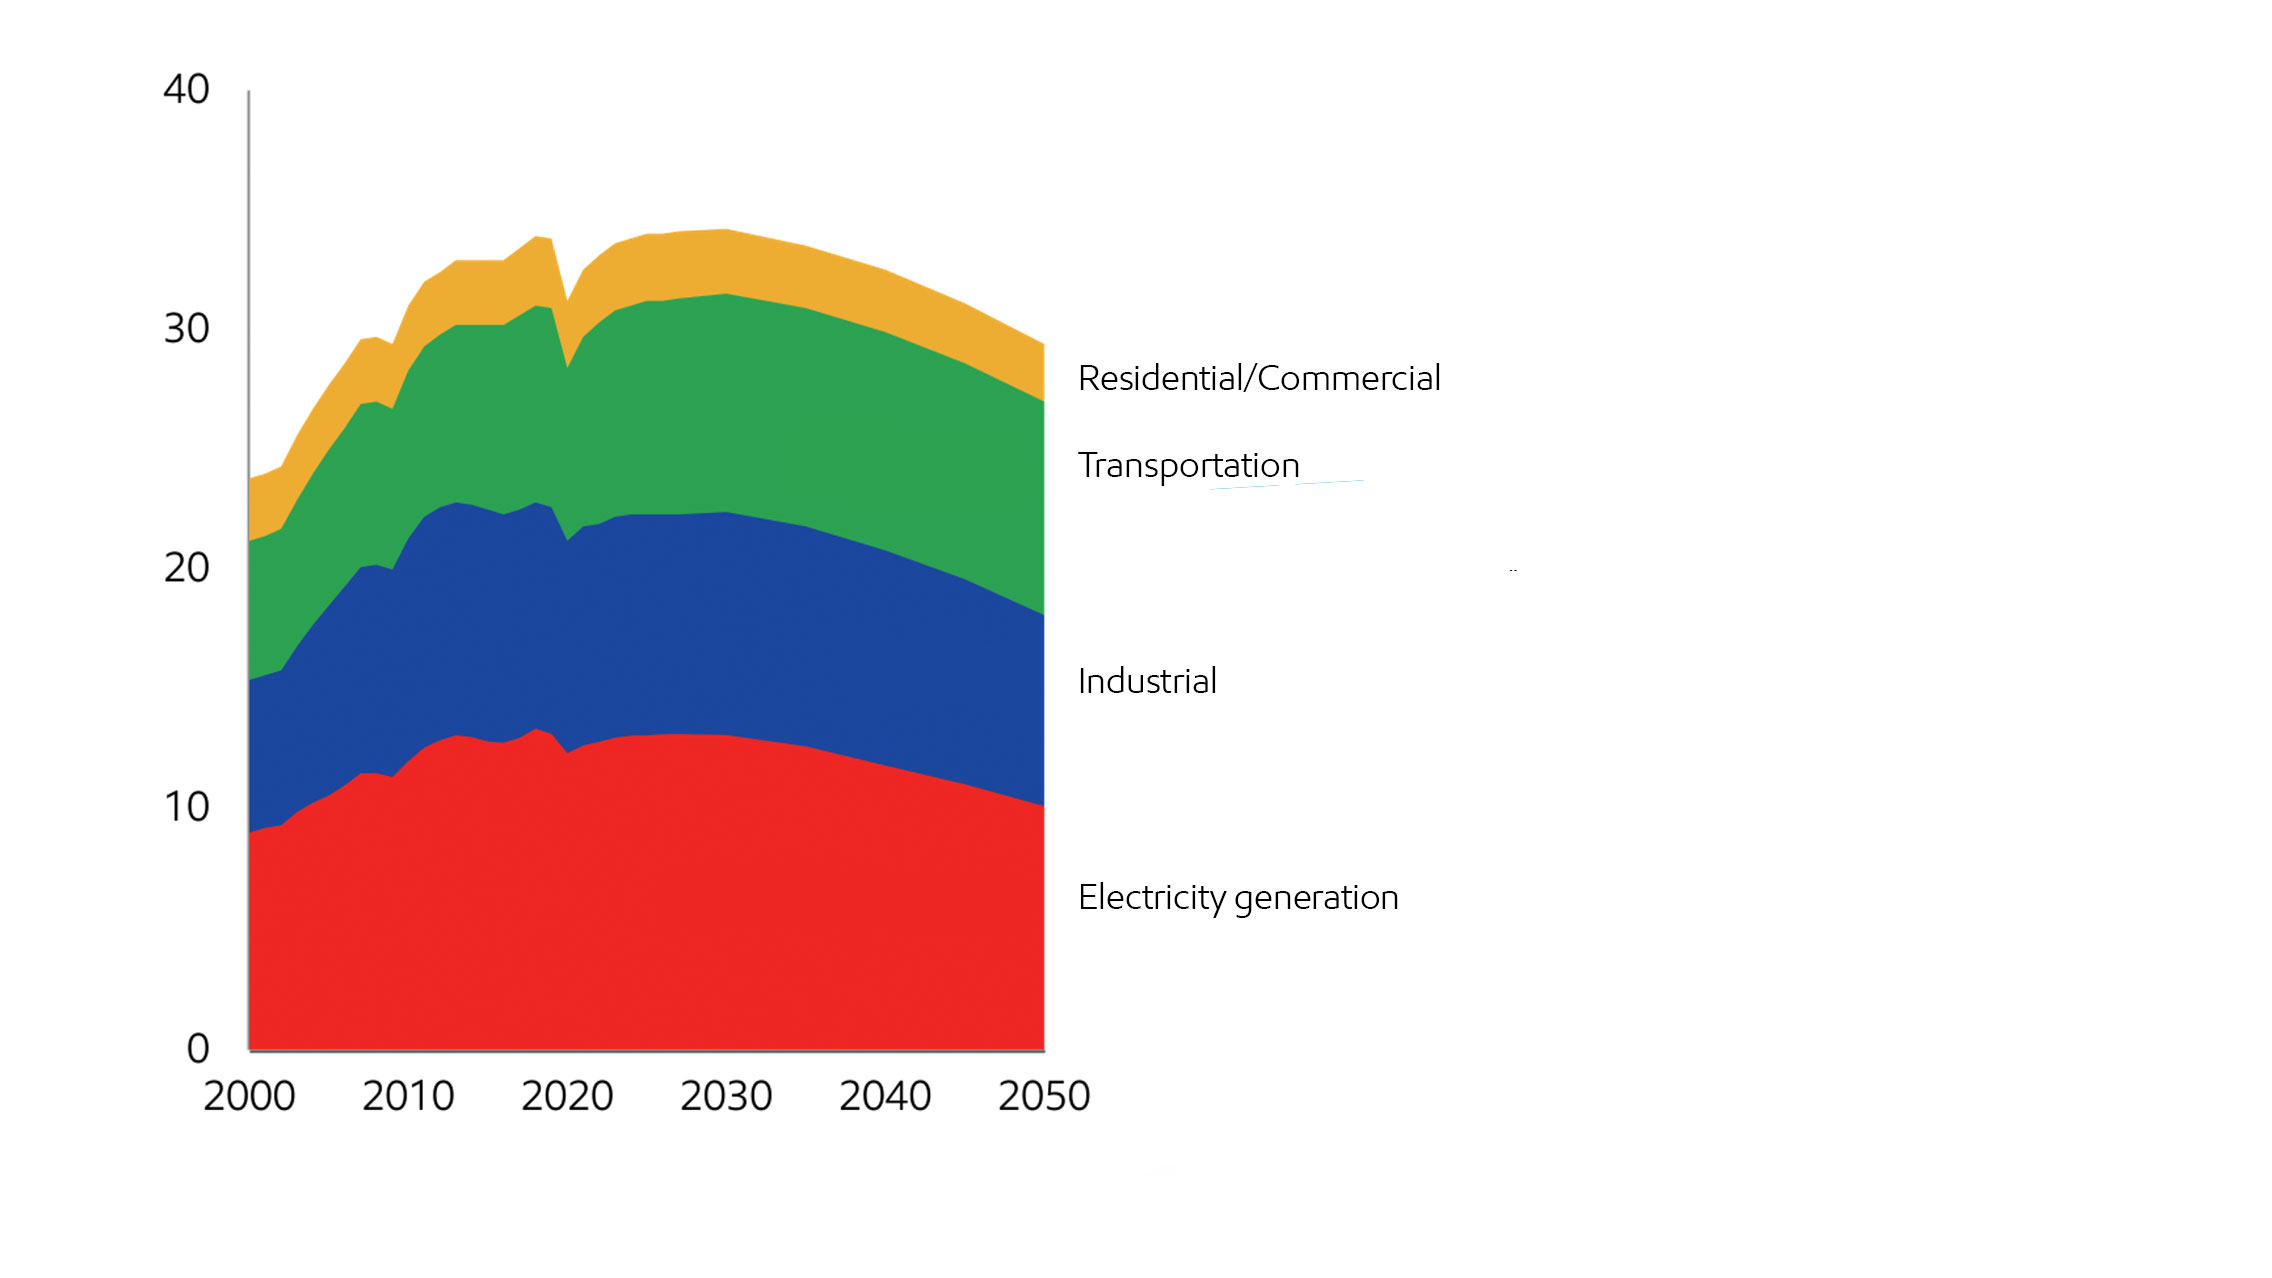 Image All sectors contributing to restrain CO2 emissions growth